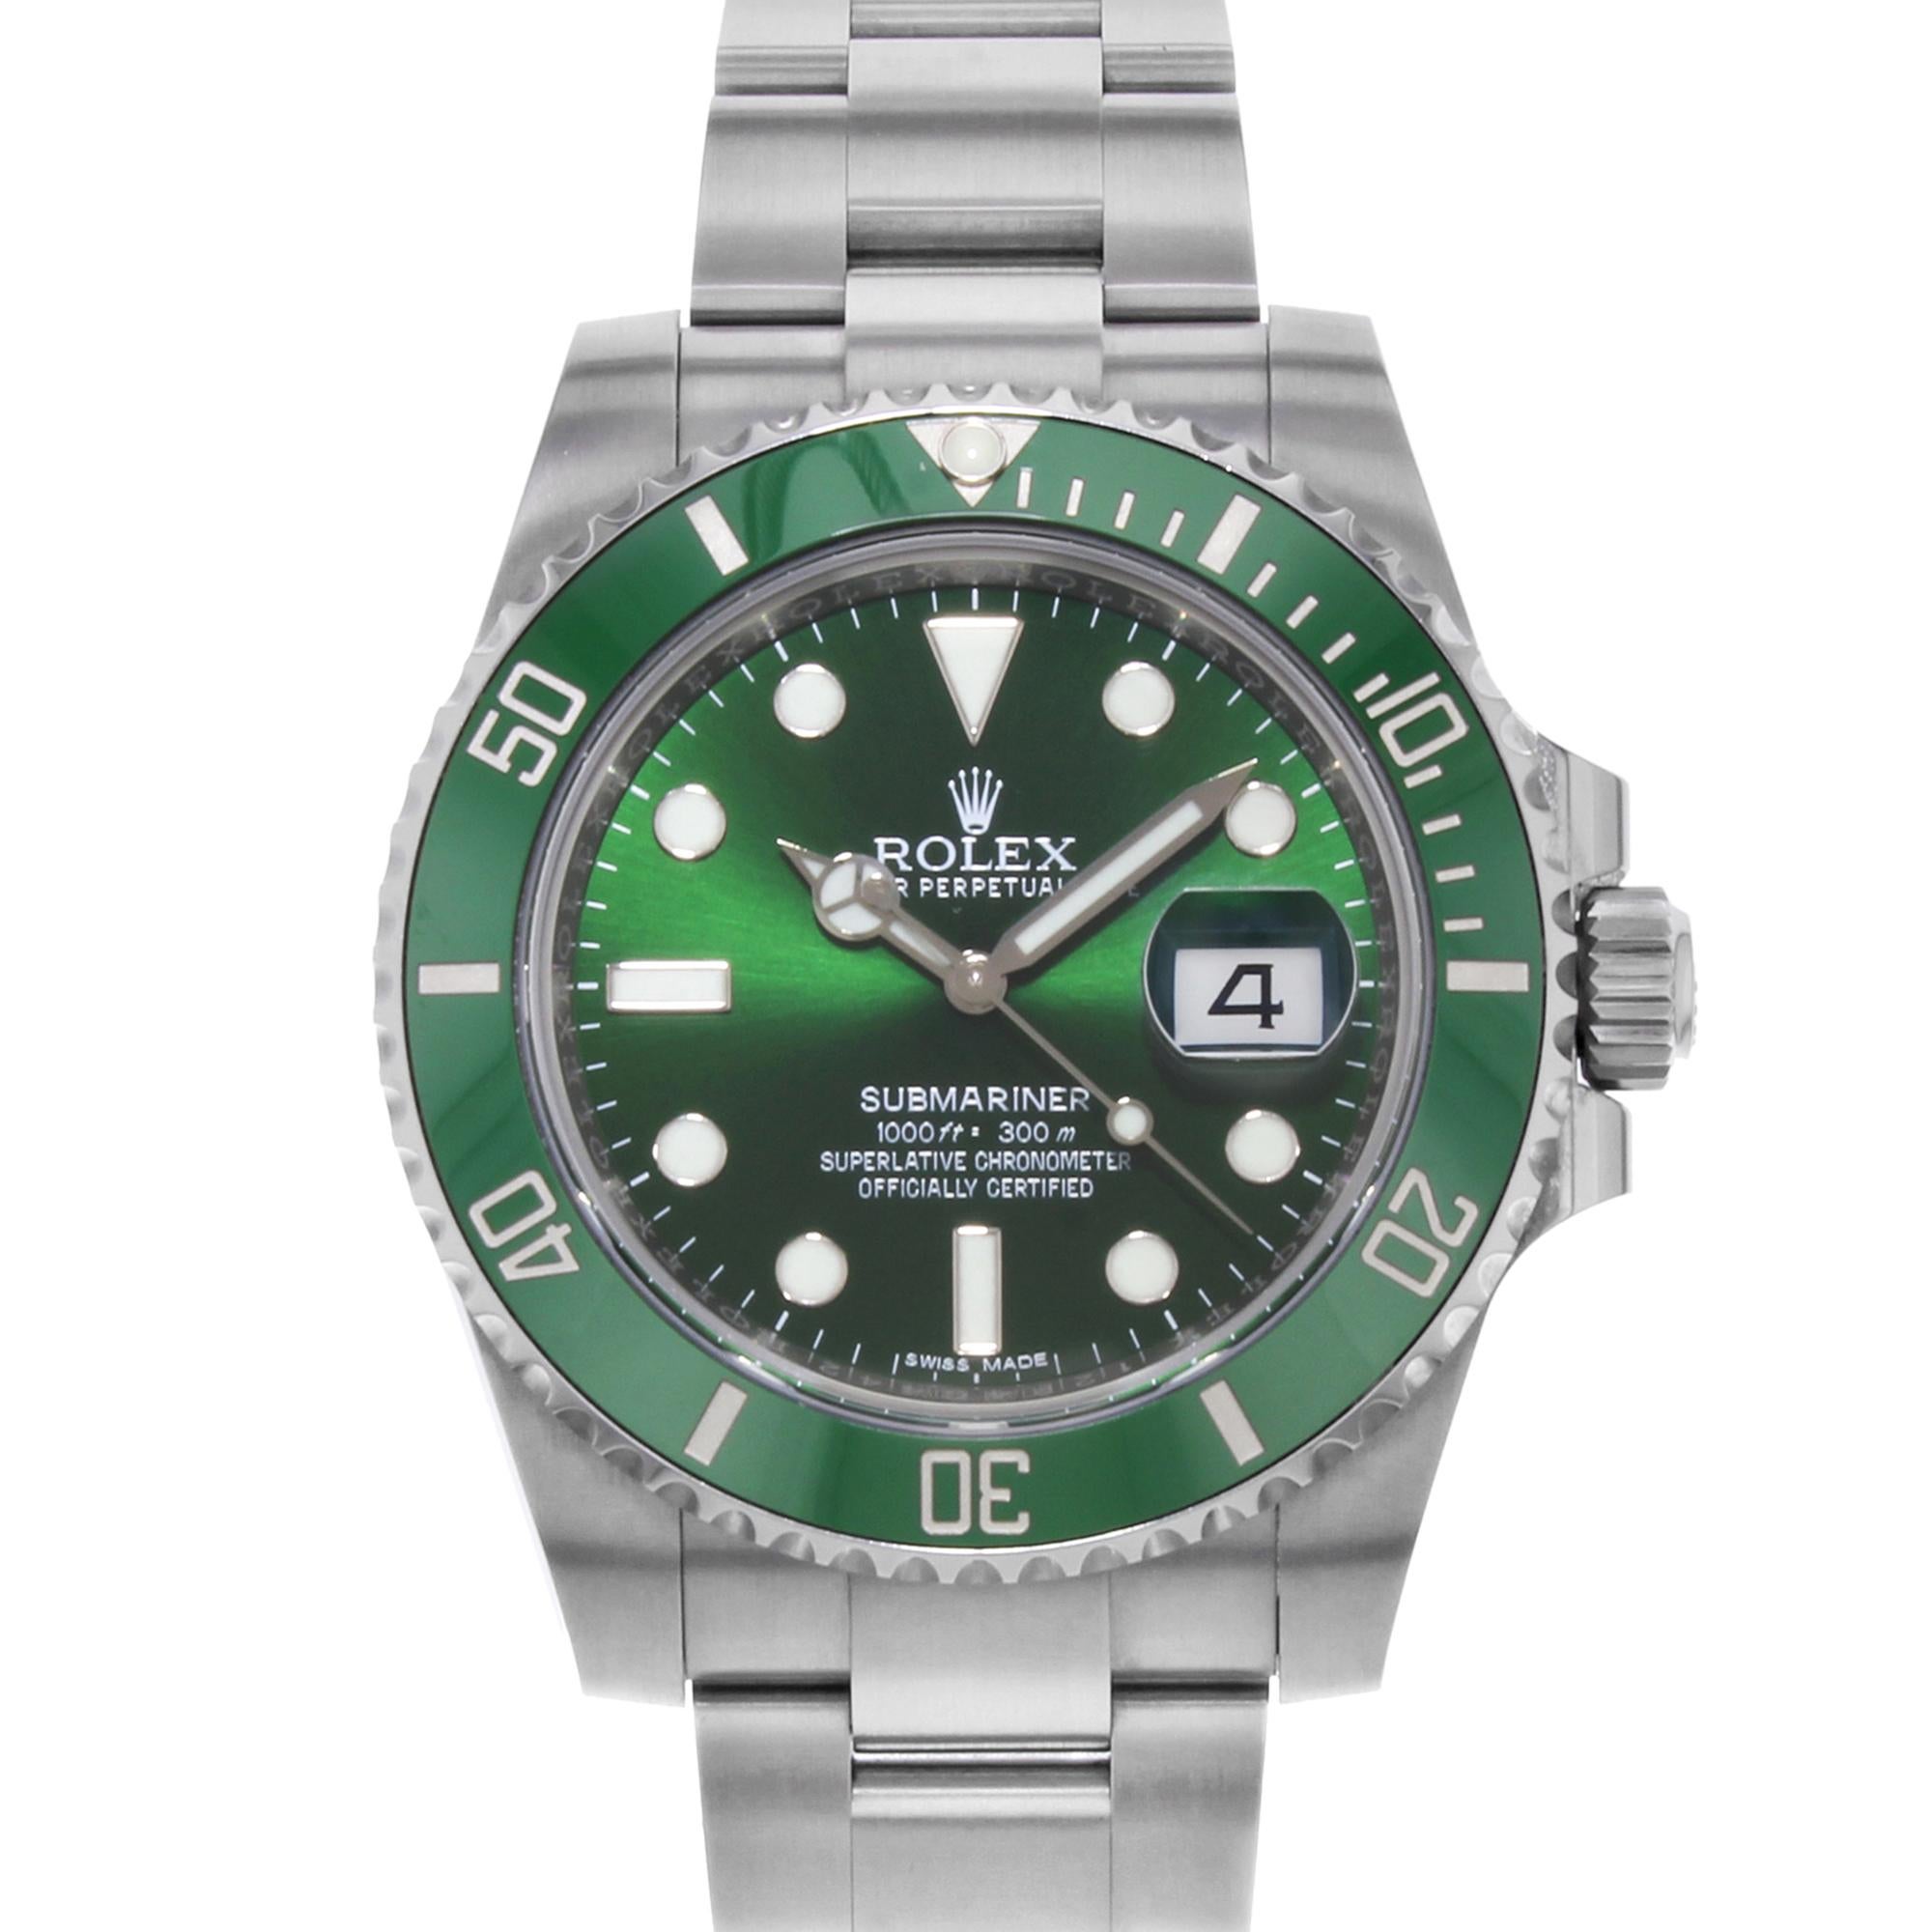 Comes with the original box but papers are not included.

Brand: Rolex  Department: Men  Model Number: 116610LV  Country/Region of Manufacture: Switzerland  Model: Rolex Submariner 116610LV  Style: Dress/Formal, Luxury  Band Color: Steel  Dial